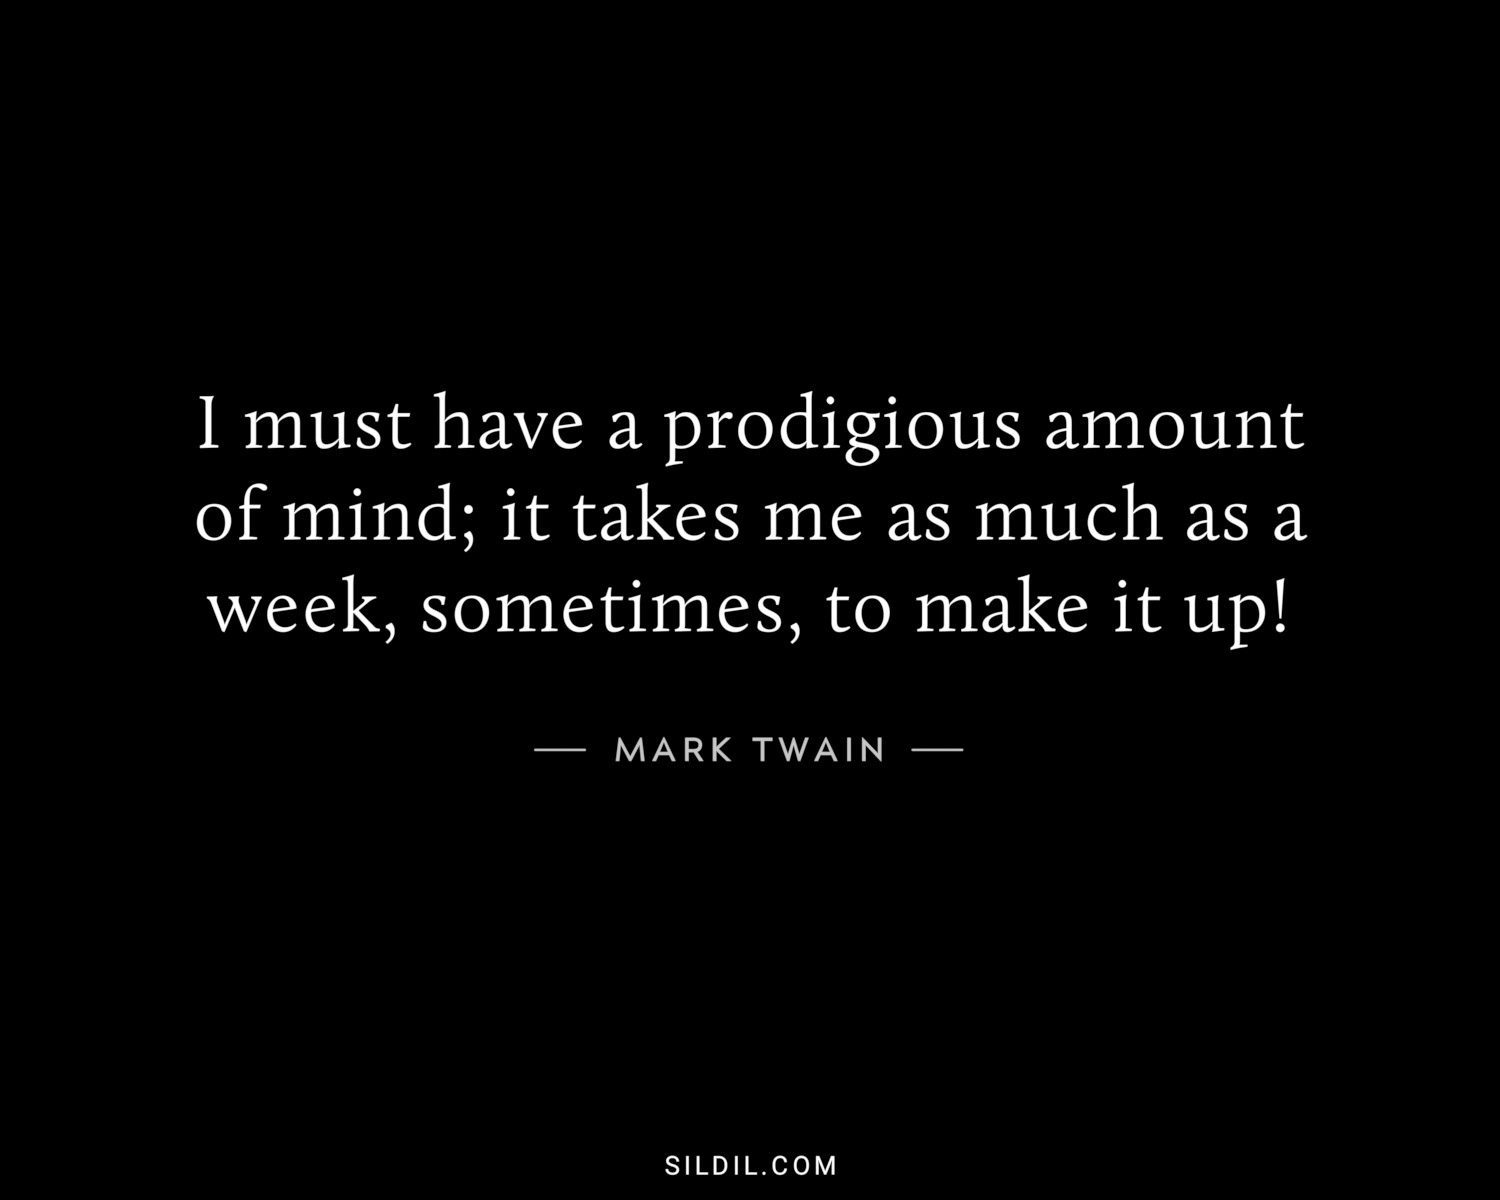 I must have a prodigious amount of mind; it takes me as much as a week, sometimes, to make it up!